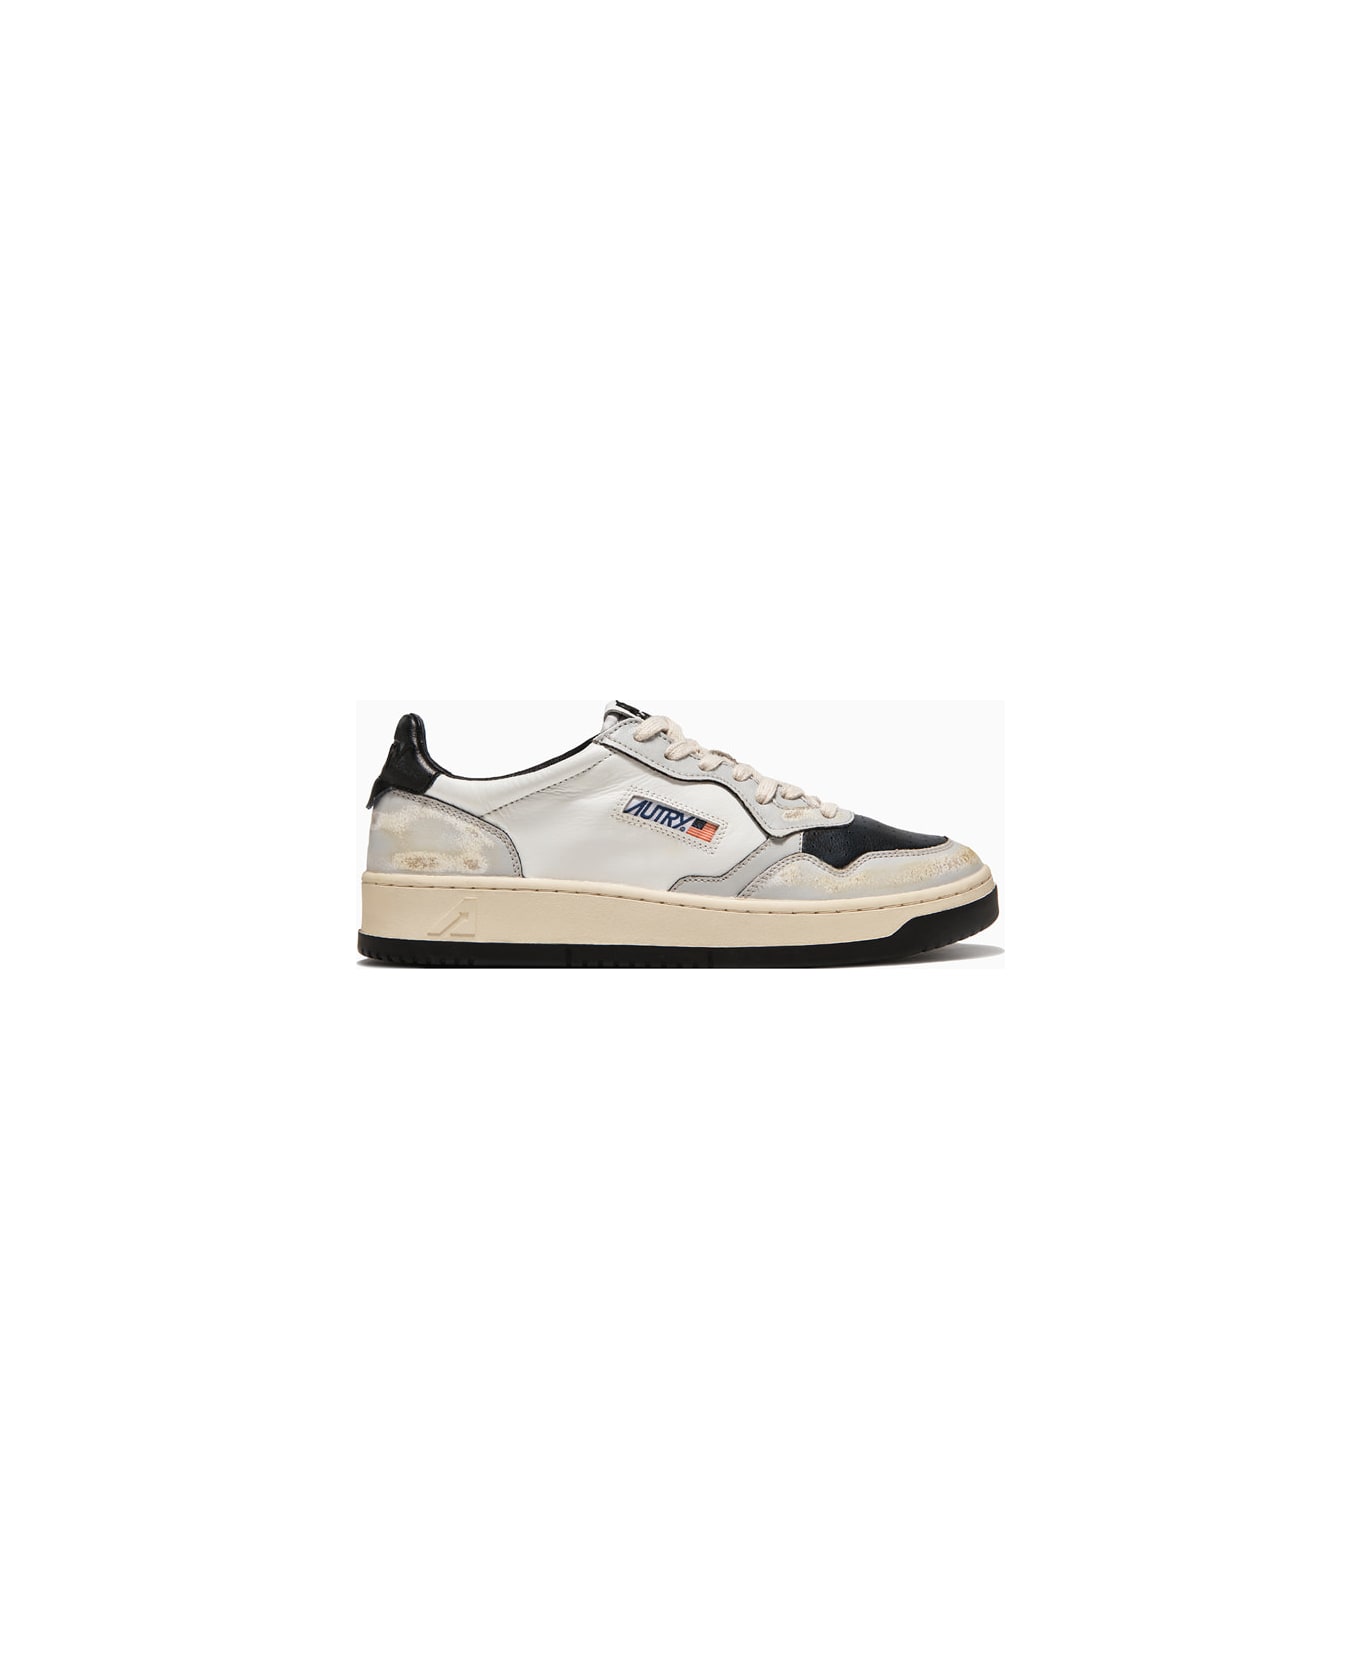 Autry Super Vintage Sneakers Avlw Sv21 - WHT/GREY